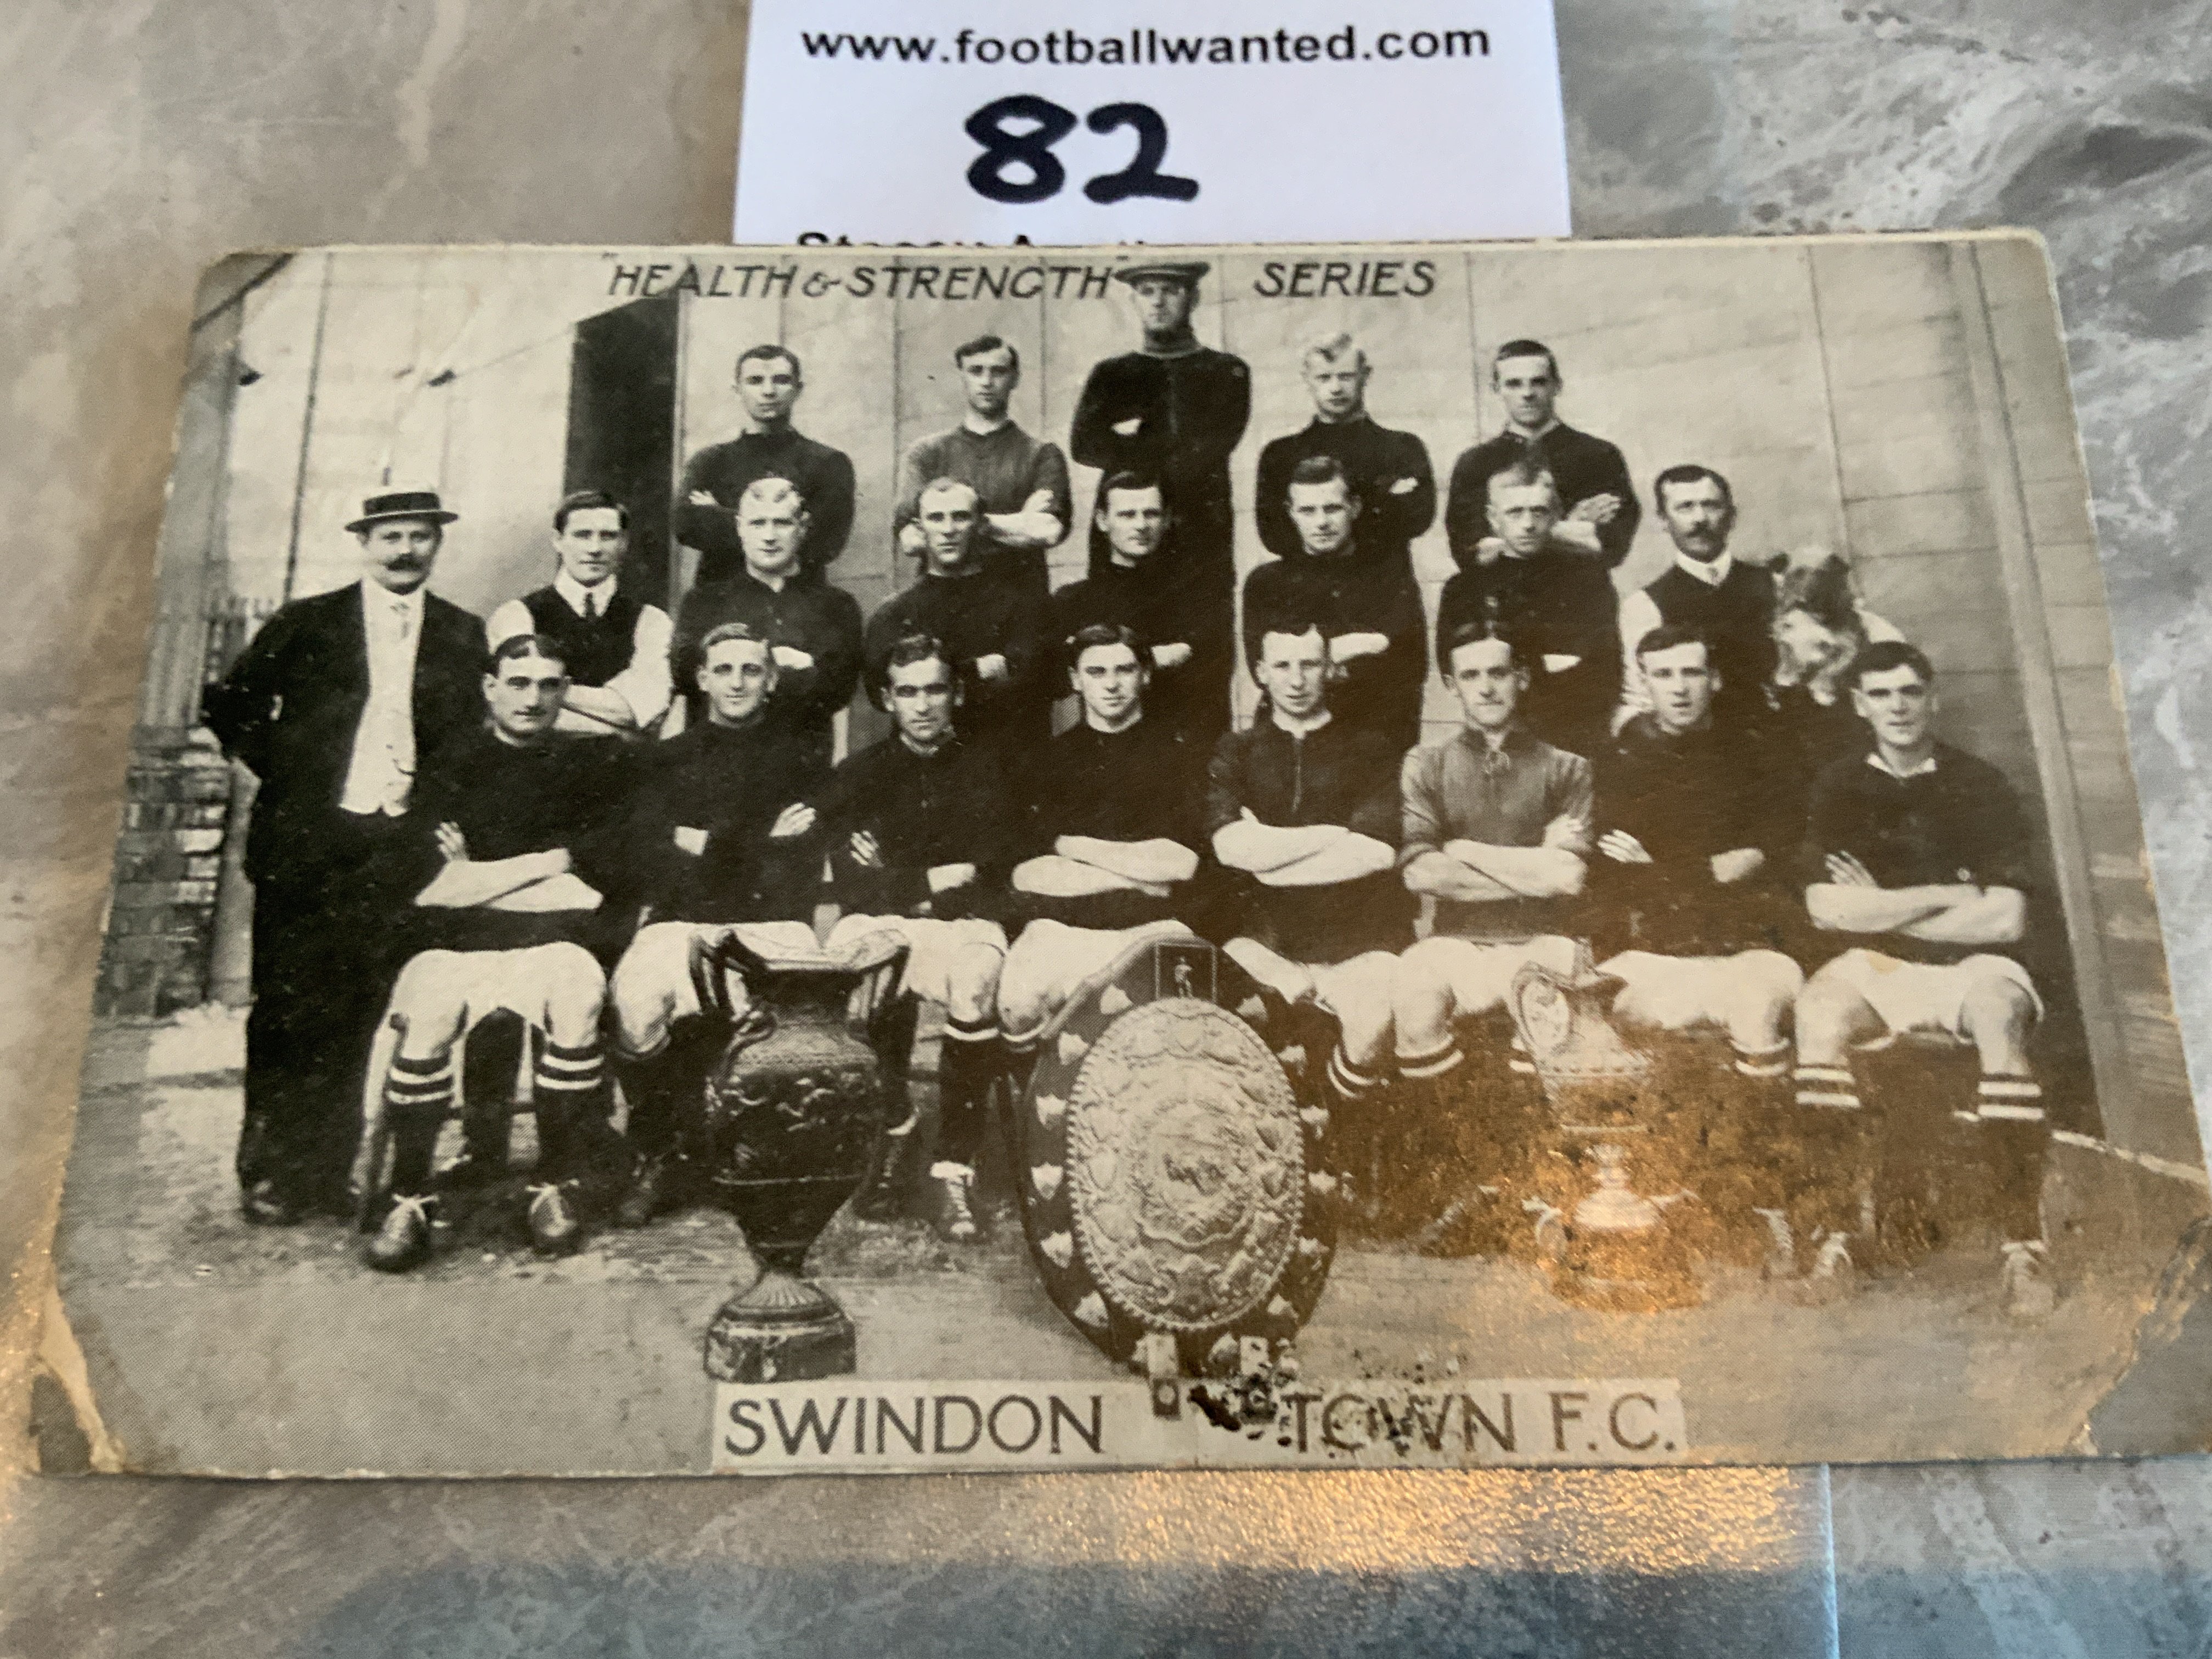 1912 Swindon Town Football Postcard: Fair condition with players names printed to rear. Nice squad